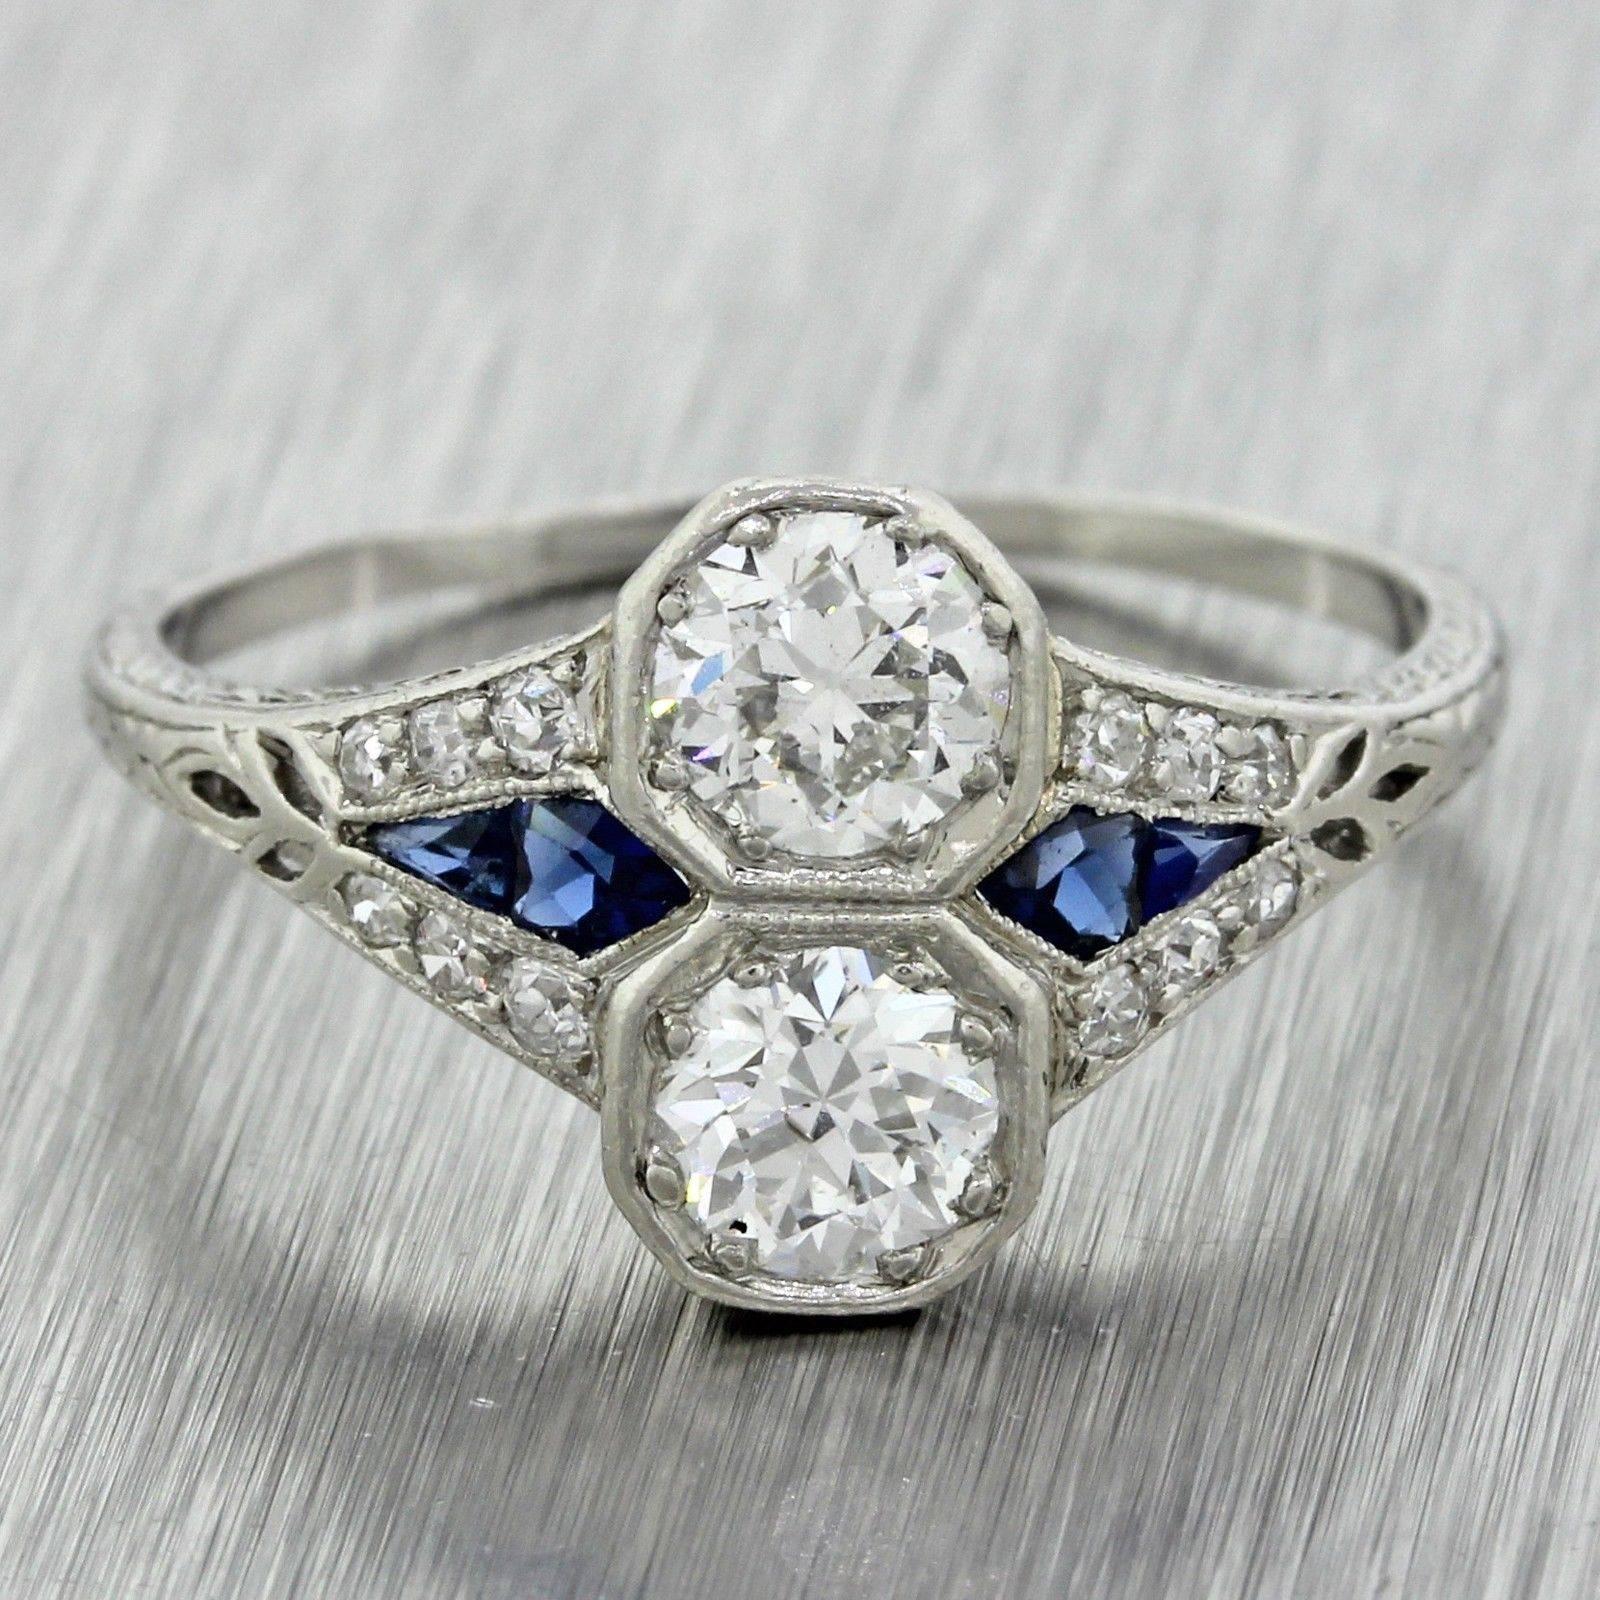 1920s Antique Art Deco Sapphire Diamond Platinum Engagement Ring In Excellent Condition For Sale In Huntington, NY